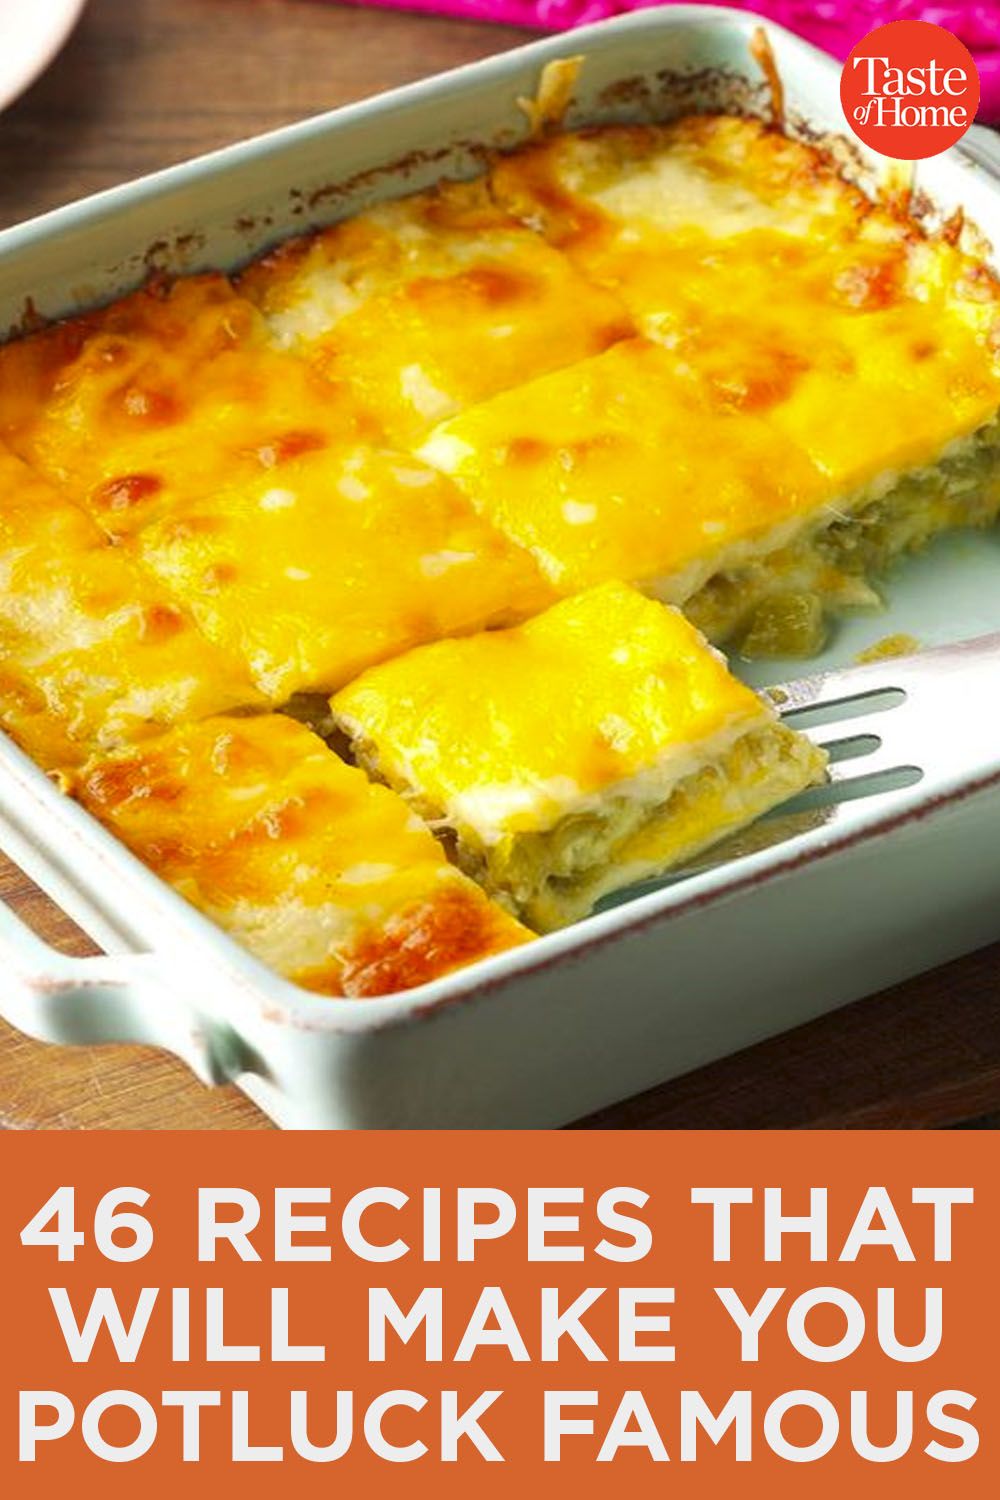 46 Recipes That Will Make You Potluck Famous